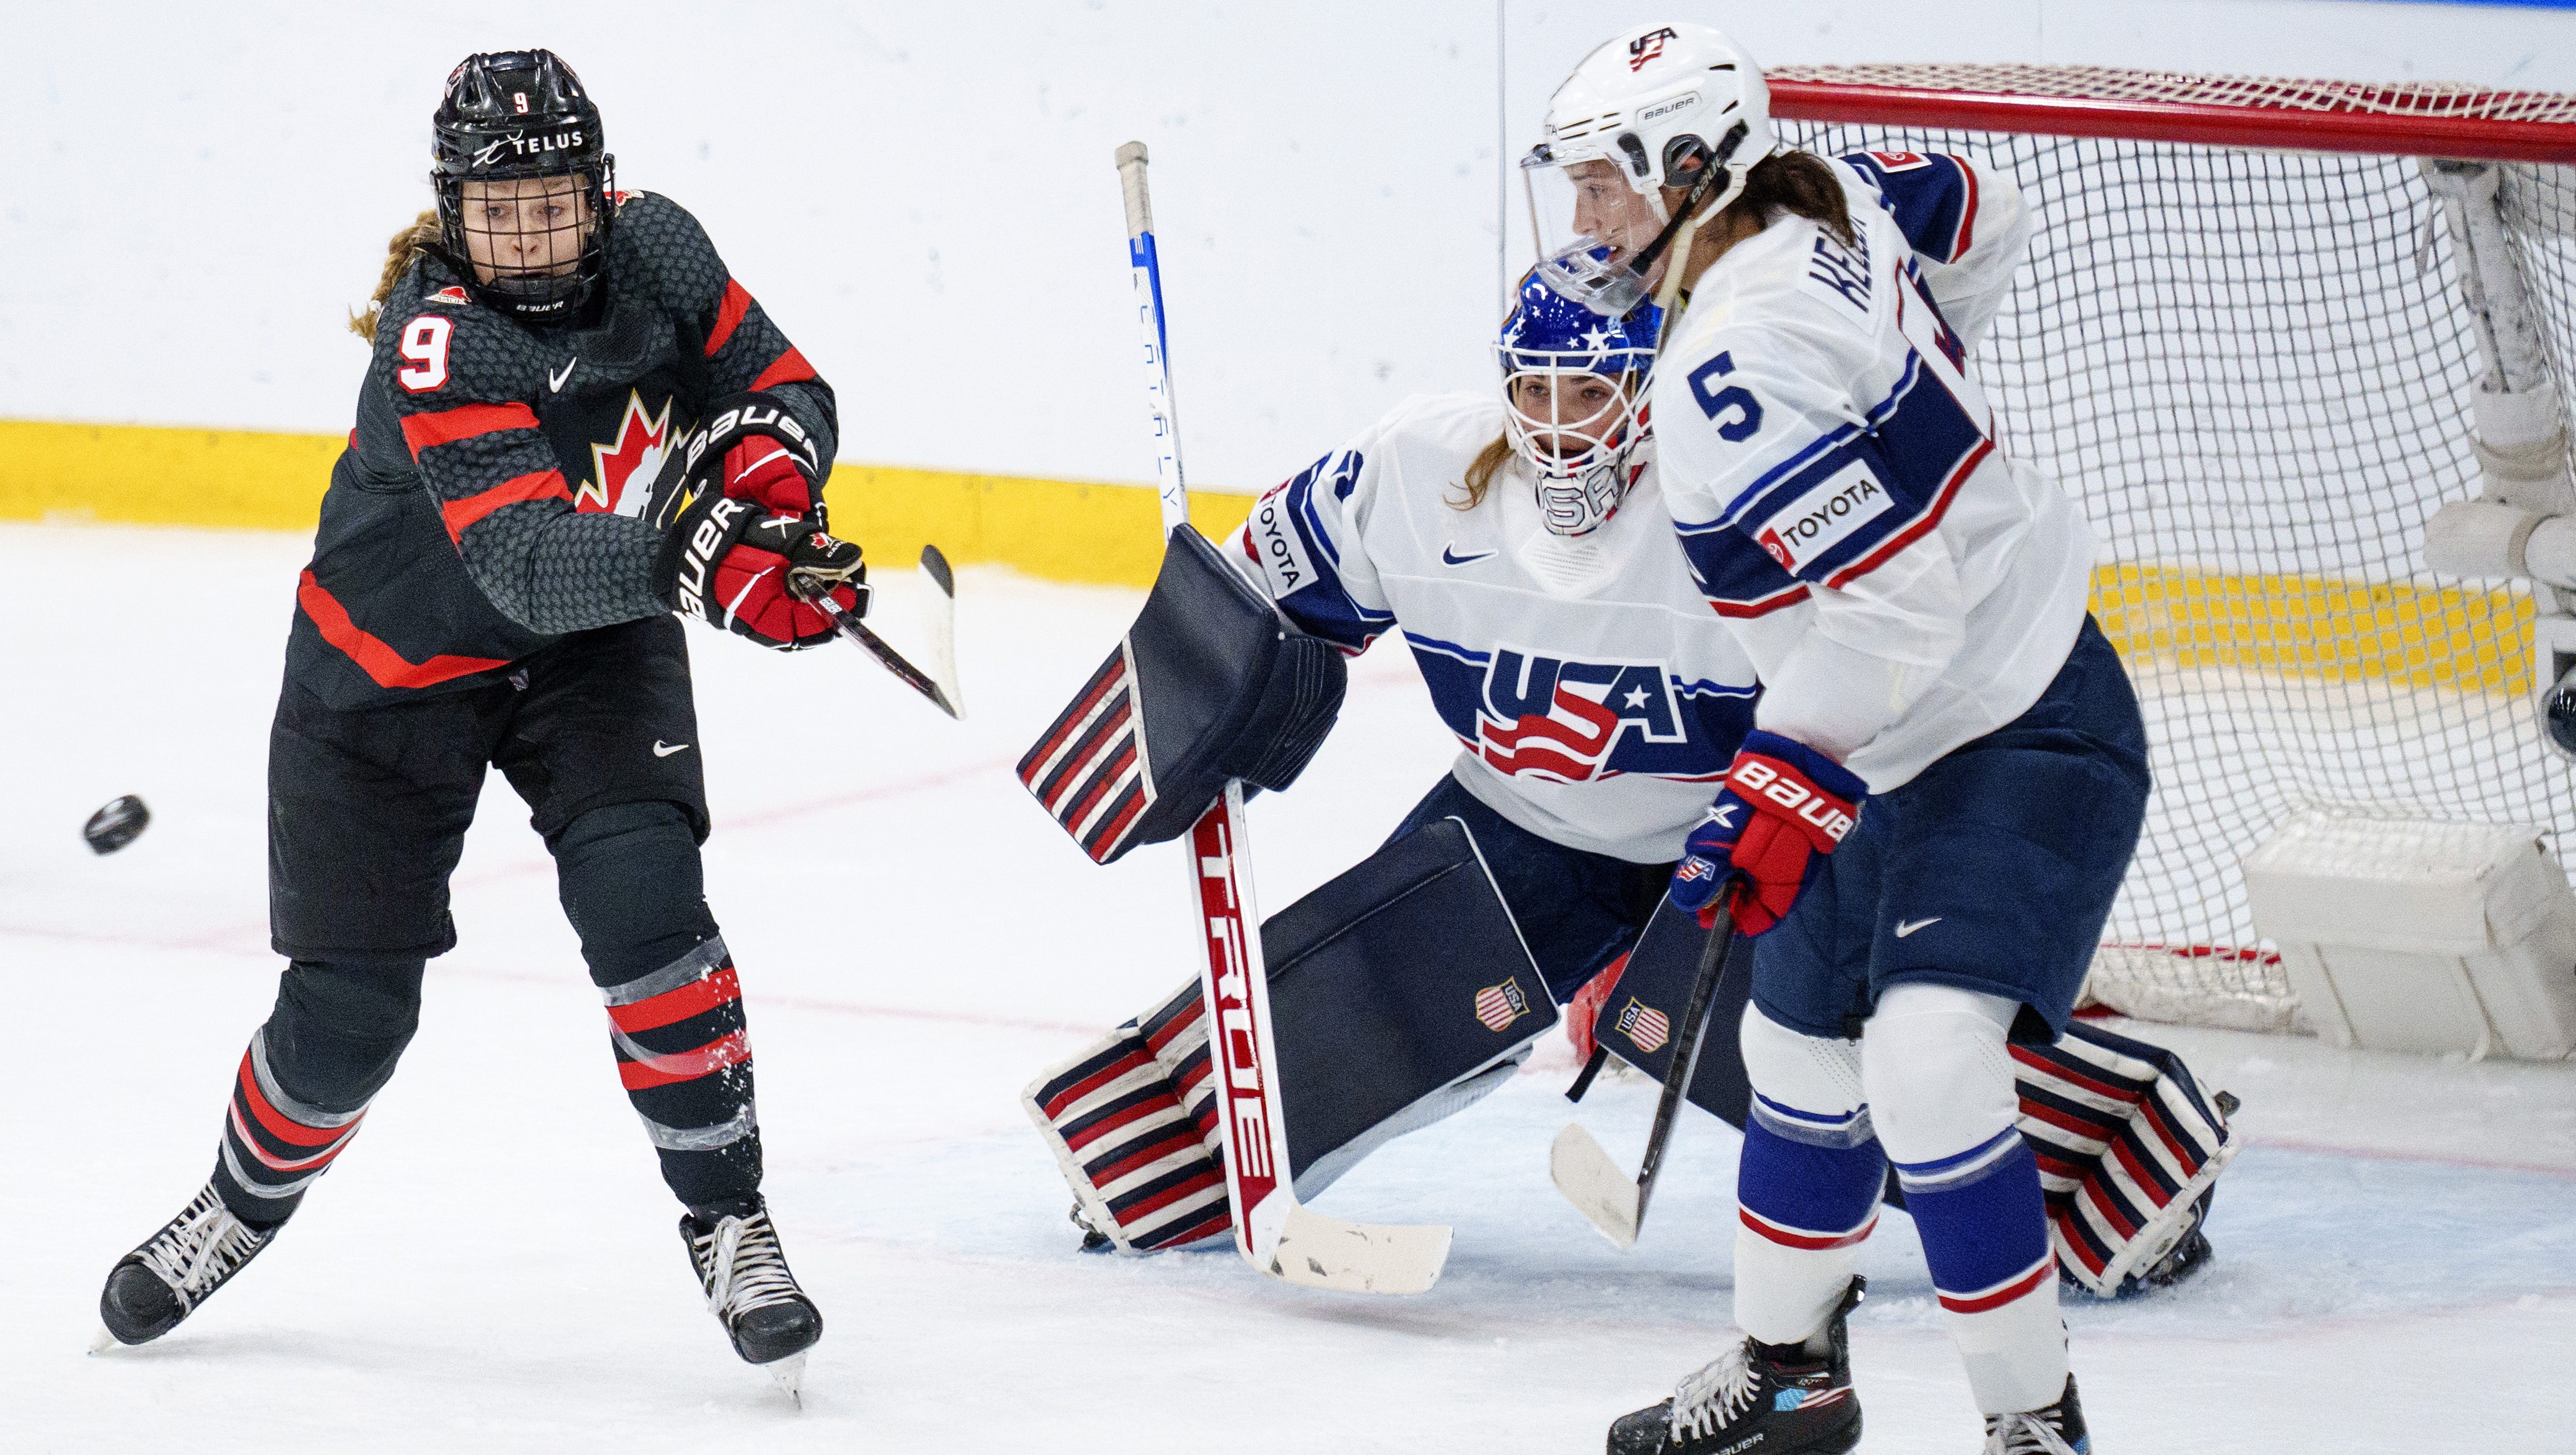 United States edges Canada in final womens world hockey championship preliminary game - Team Canada